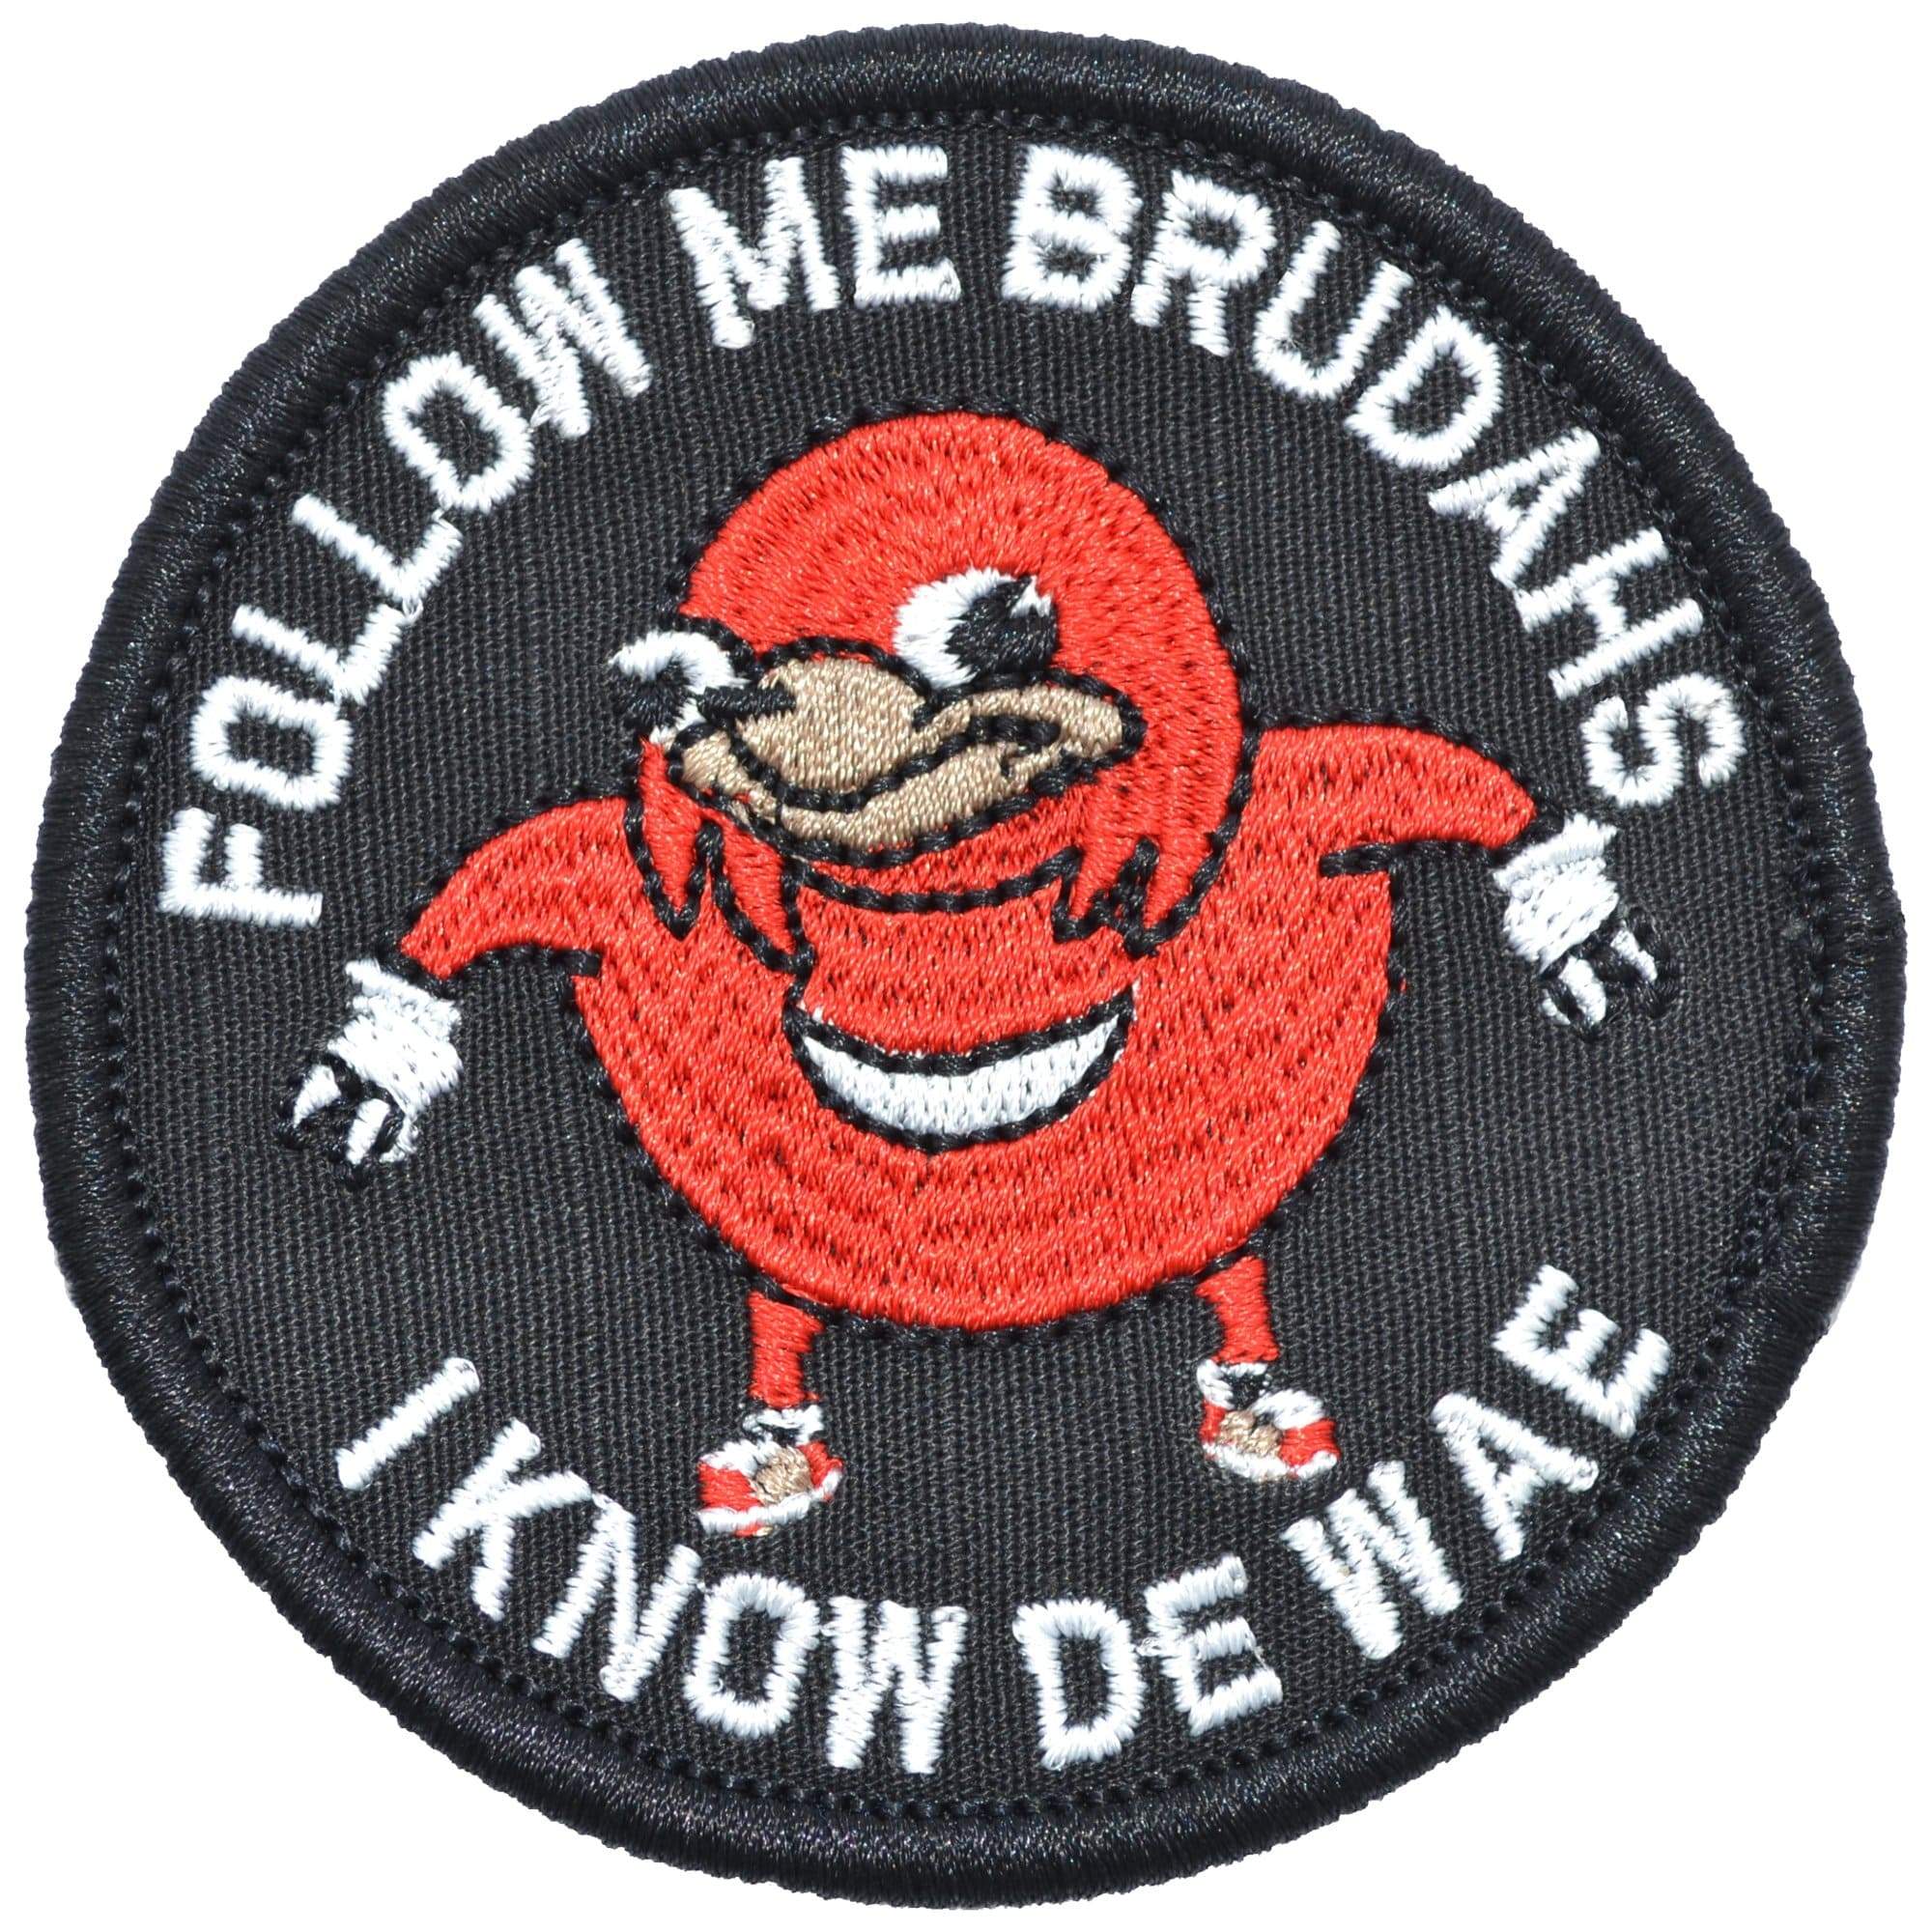 Tactical Gear Junkie Patches Ugandan Knuckles Follow Me Brudahs I Know De Wae - 3 inch Round Patch